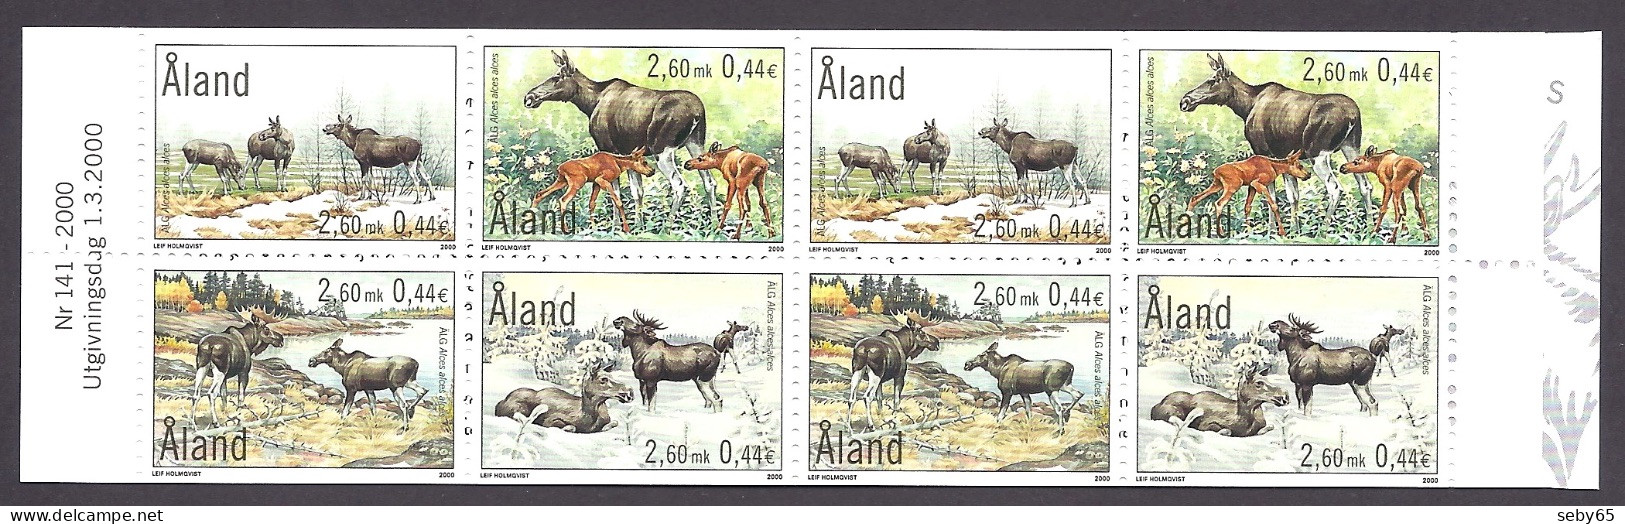 Aland 2000 - Complete Year Set, Full Stamp Collection, With Nice Folder, Mint - MNH - Ålandinseln